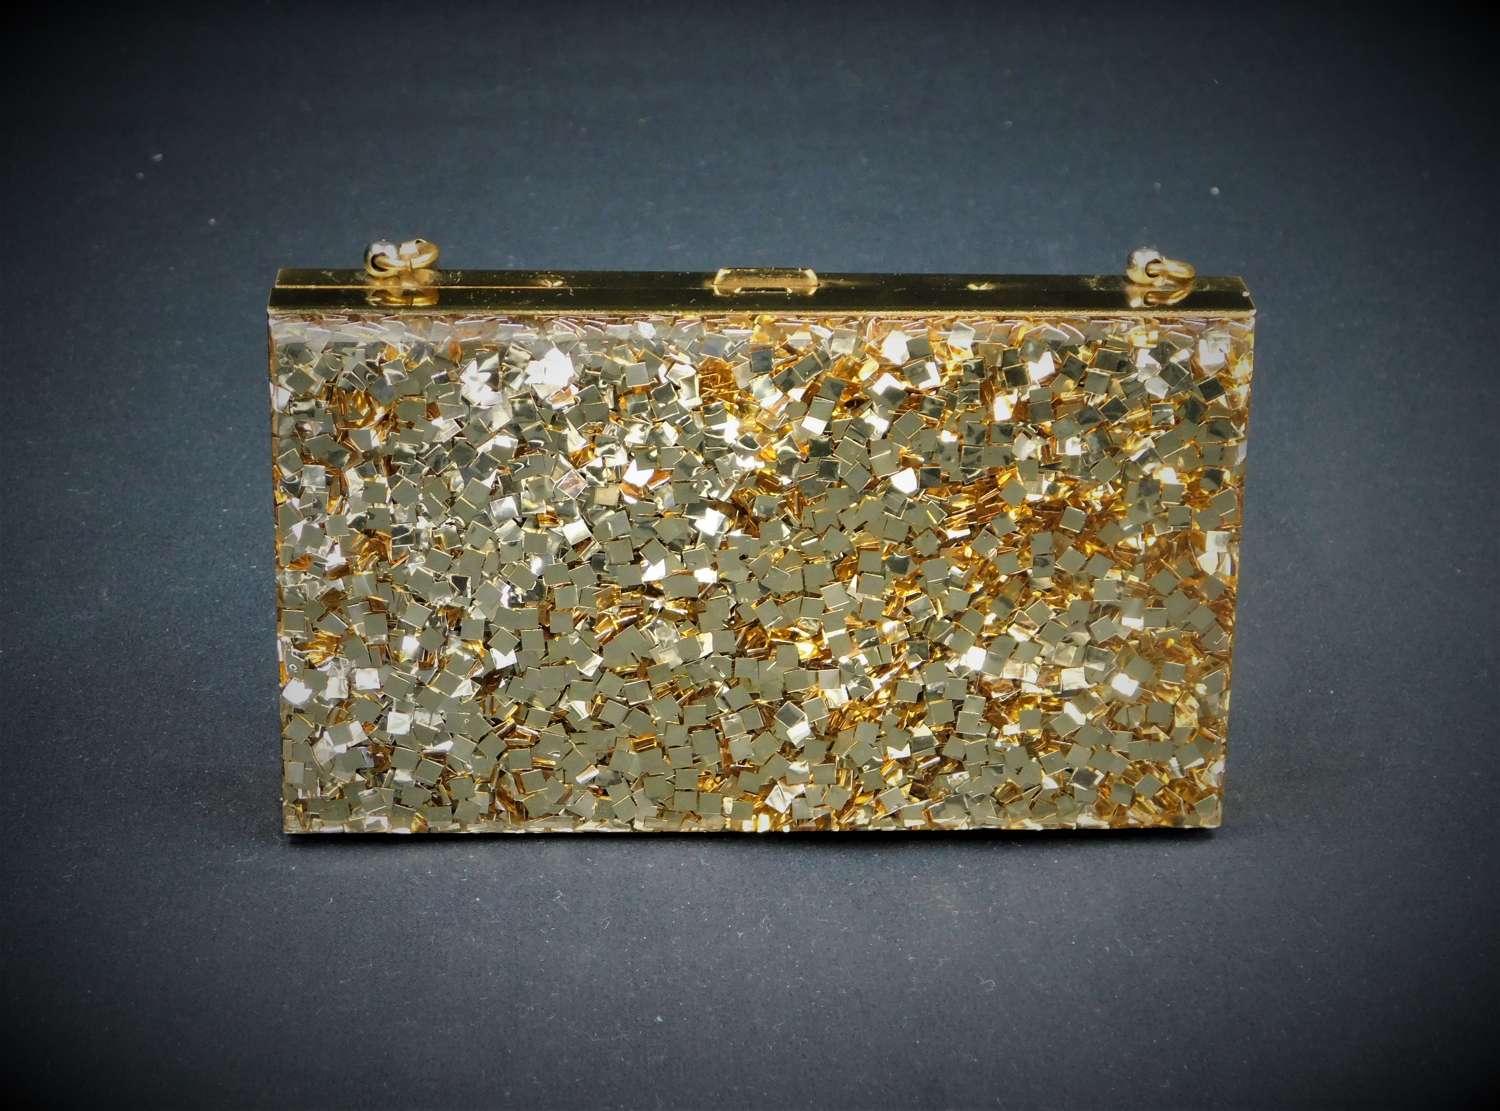 Glitter Lucite Compact Carryall